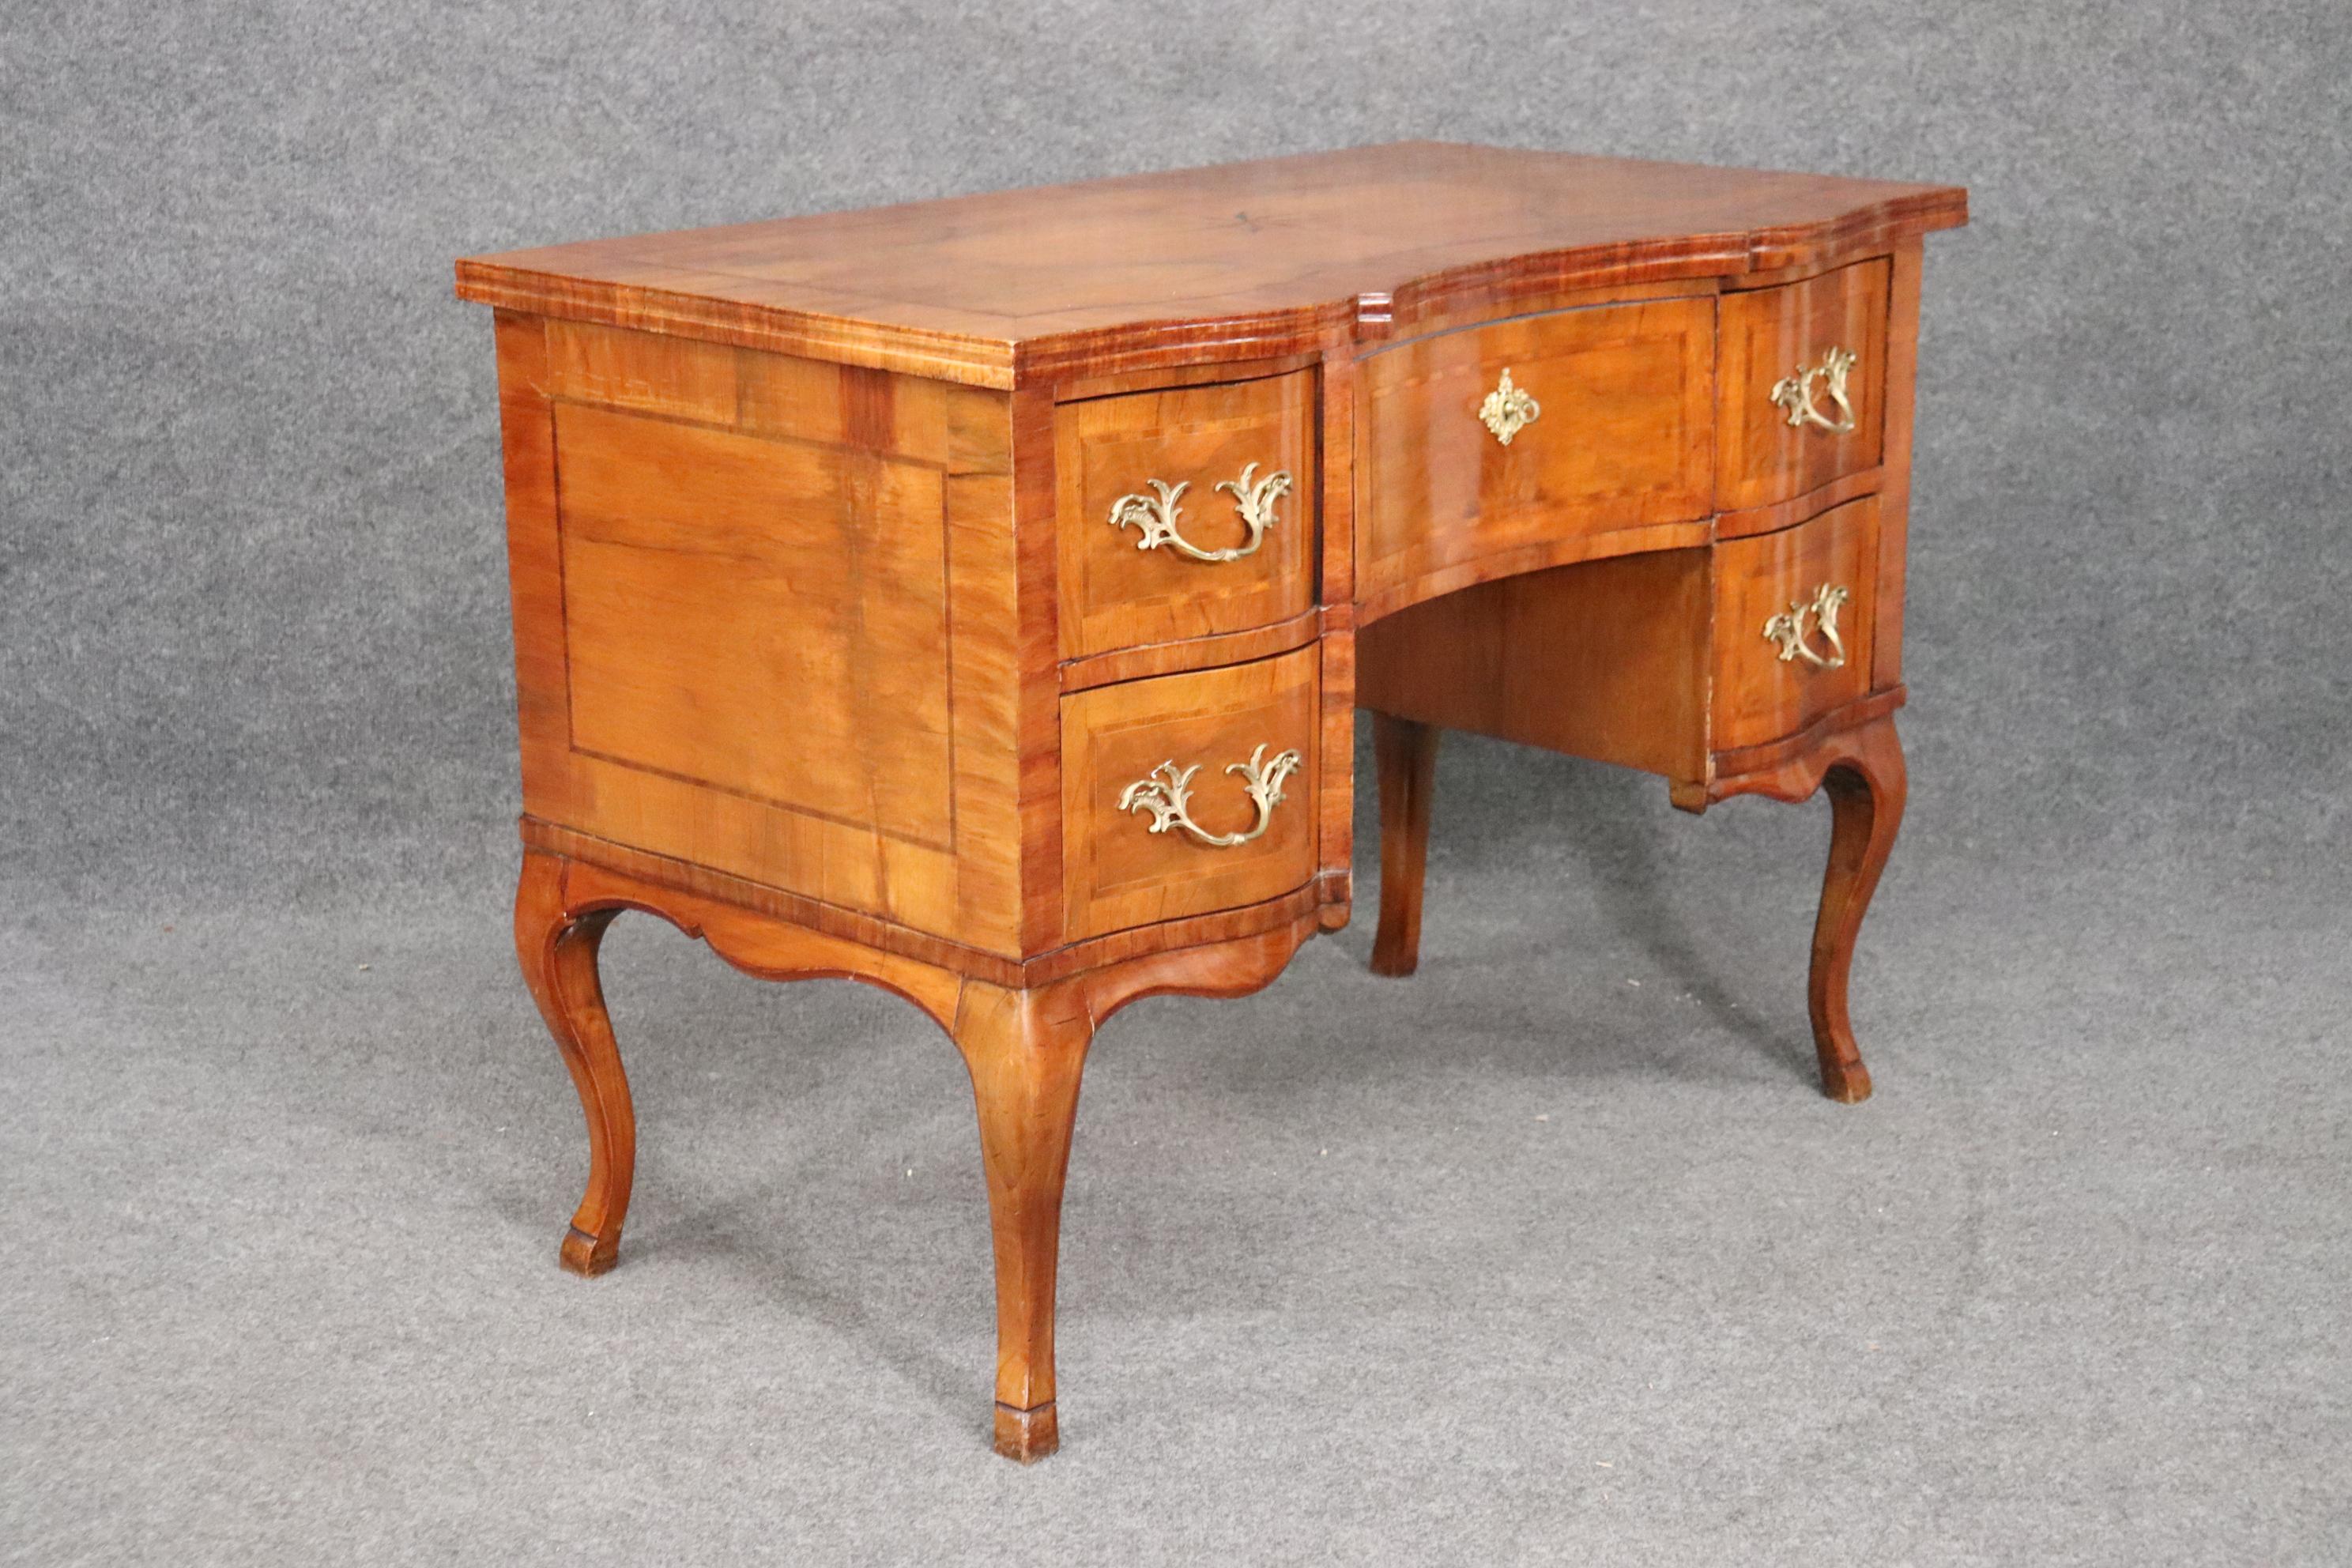 This is a beautiful desk that features the design of a Louis XV desk and has the traits of an Italian desk as well. The desk has beautiful inlay and even bronze hardware. The desk measures 45 wide x 25 deep x 32 tall. Dates to the 1920s.